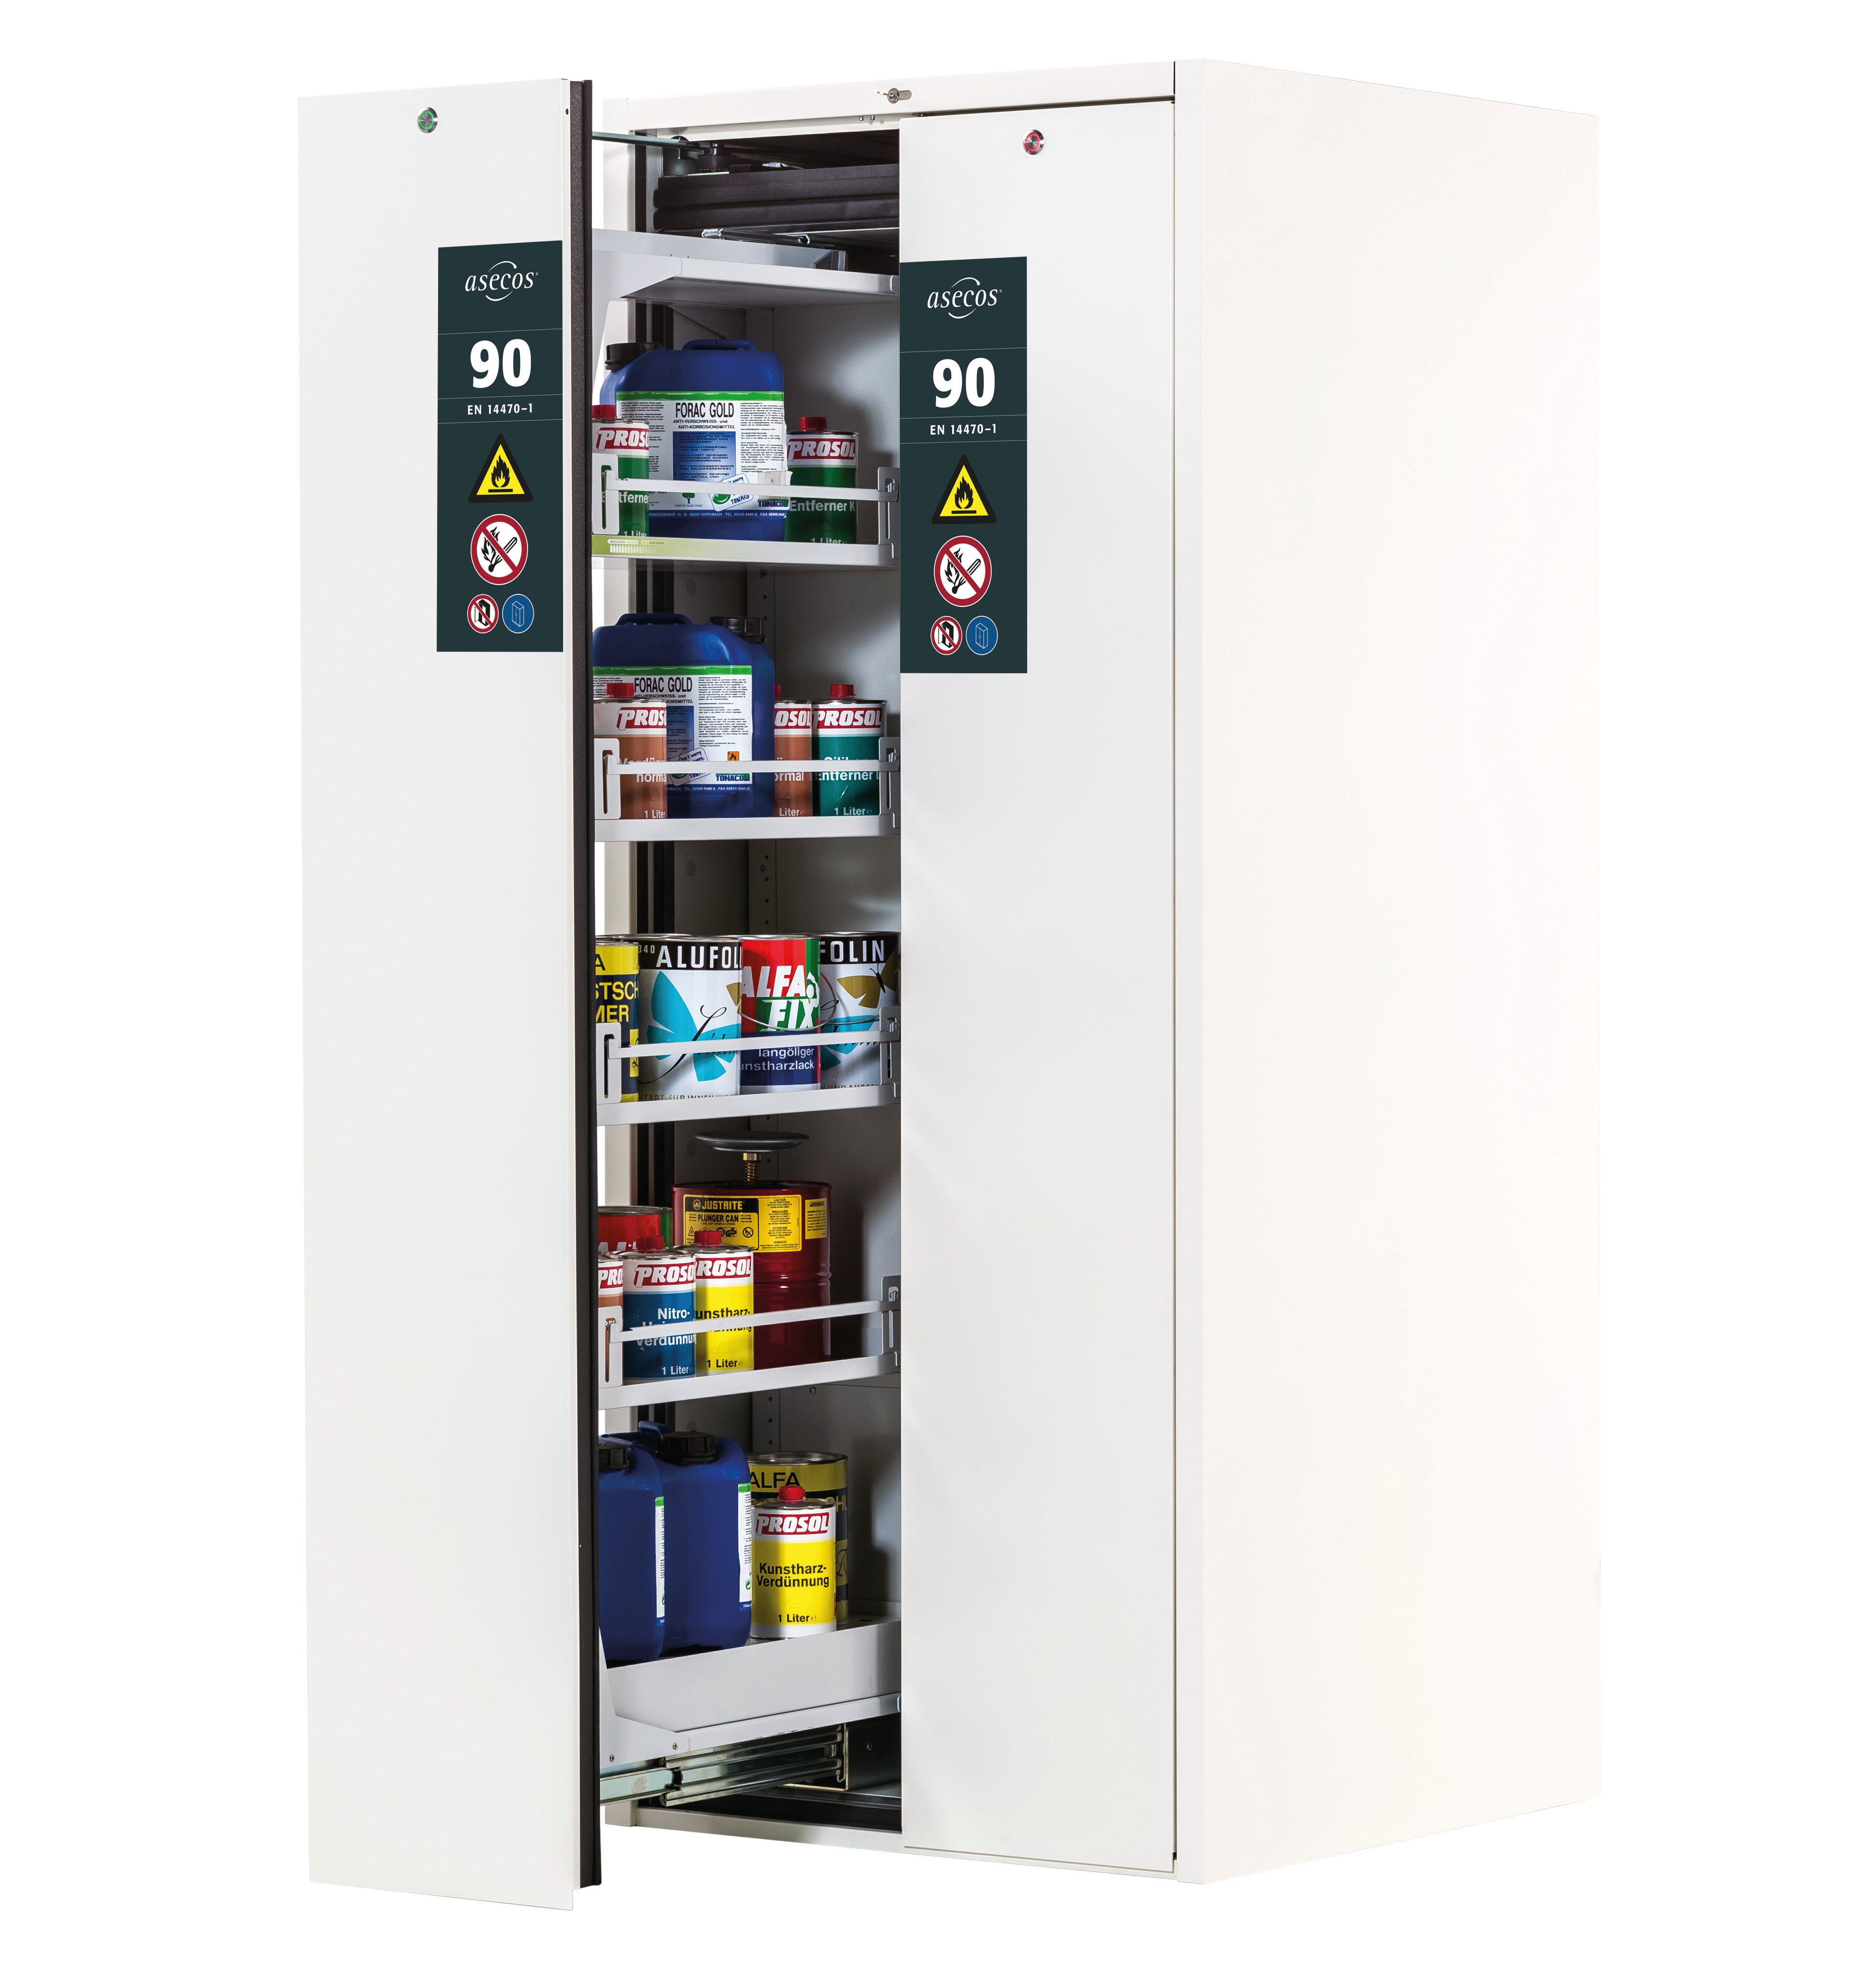 Type 90 safety cabinet V-MOVE-90 model V90.196.081.VDAC:0012 in laboratory white (similar to RAL 9016) with 4x standard shelves (sheet steel)